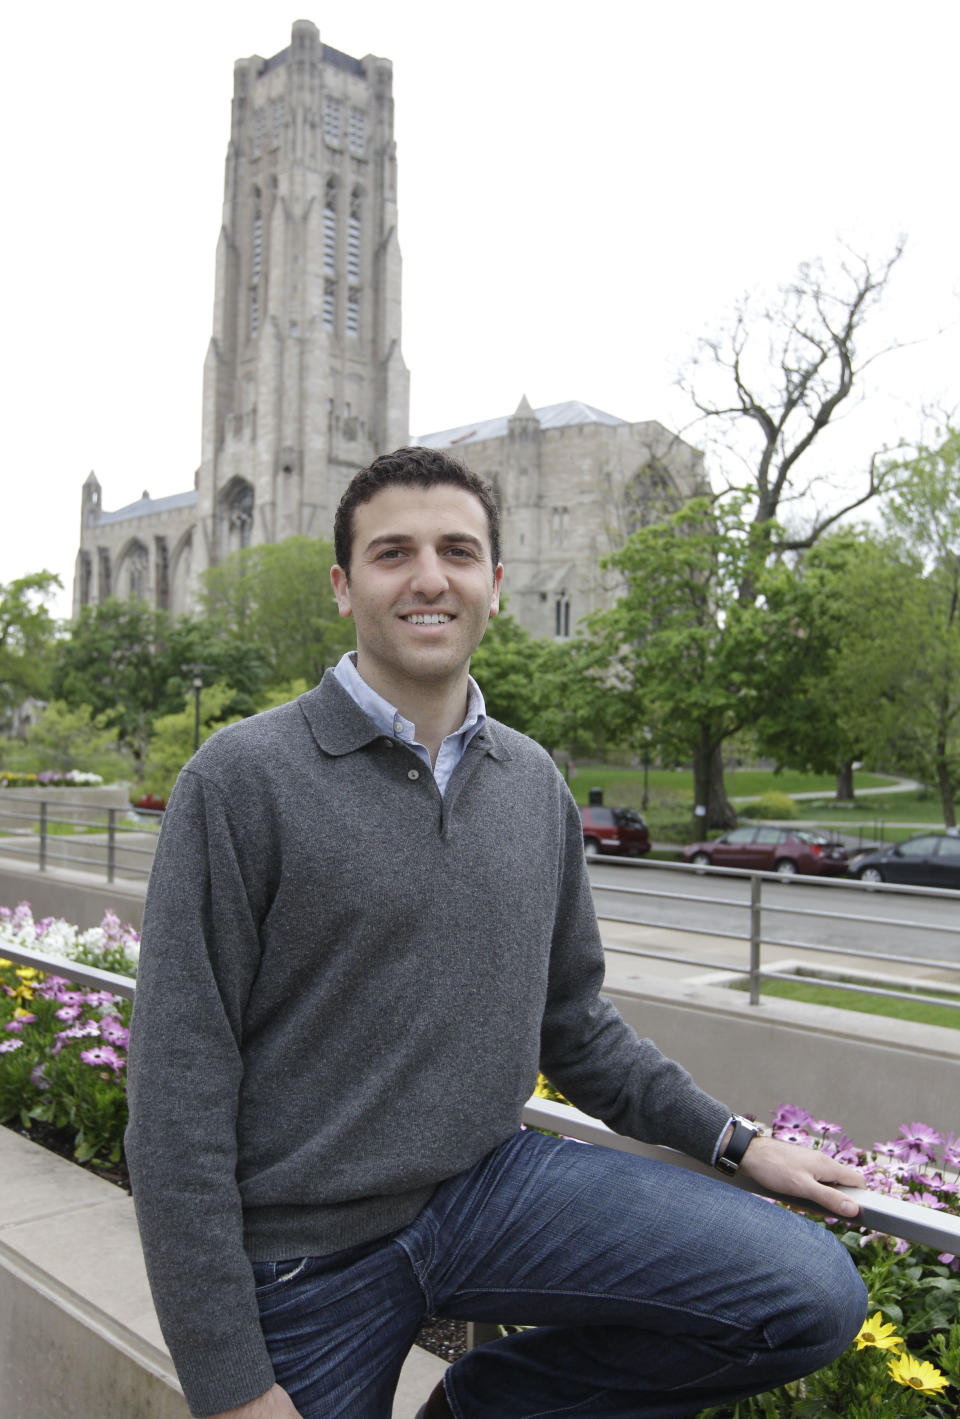 This May 2, 2012 photo shows Daniel Shani on the University of Chicago campus. In June 2012, at 25, Shani graduates with an MBA from the university's Booth School of Business. Up next: a job heading his own company, Energy Intelligence LLC, an alternative energy startup based in Massachusetts. Many of his classmates will join high-powered financial, consulting and marketing firms. But he'll be his own boss, trying to convert a bold idea into a successful venture. (AP Photo/M. Spencer Green)